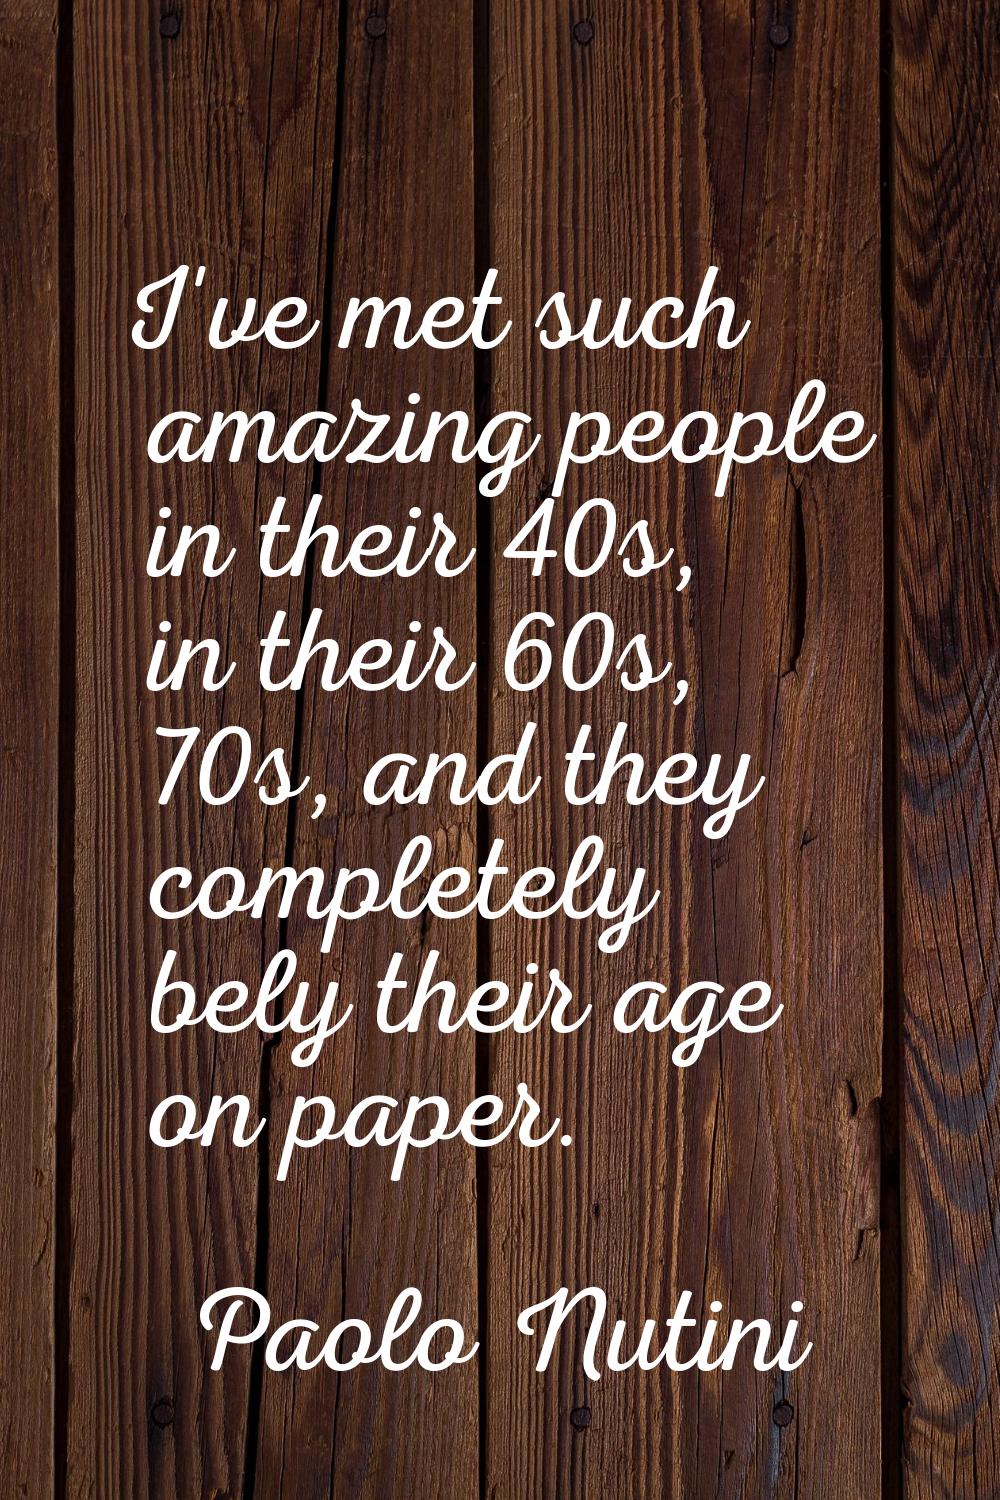 I've met such amazing people in their 40s, in their 60s, 70s, and they completely bely their age on